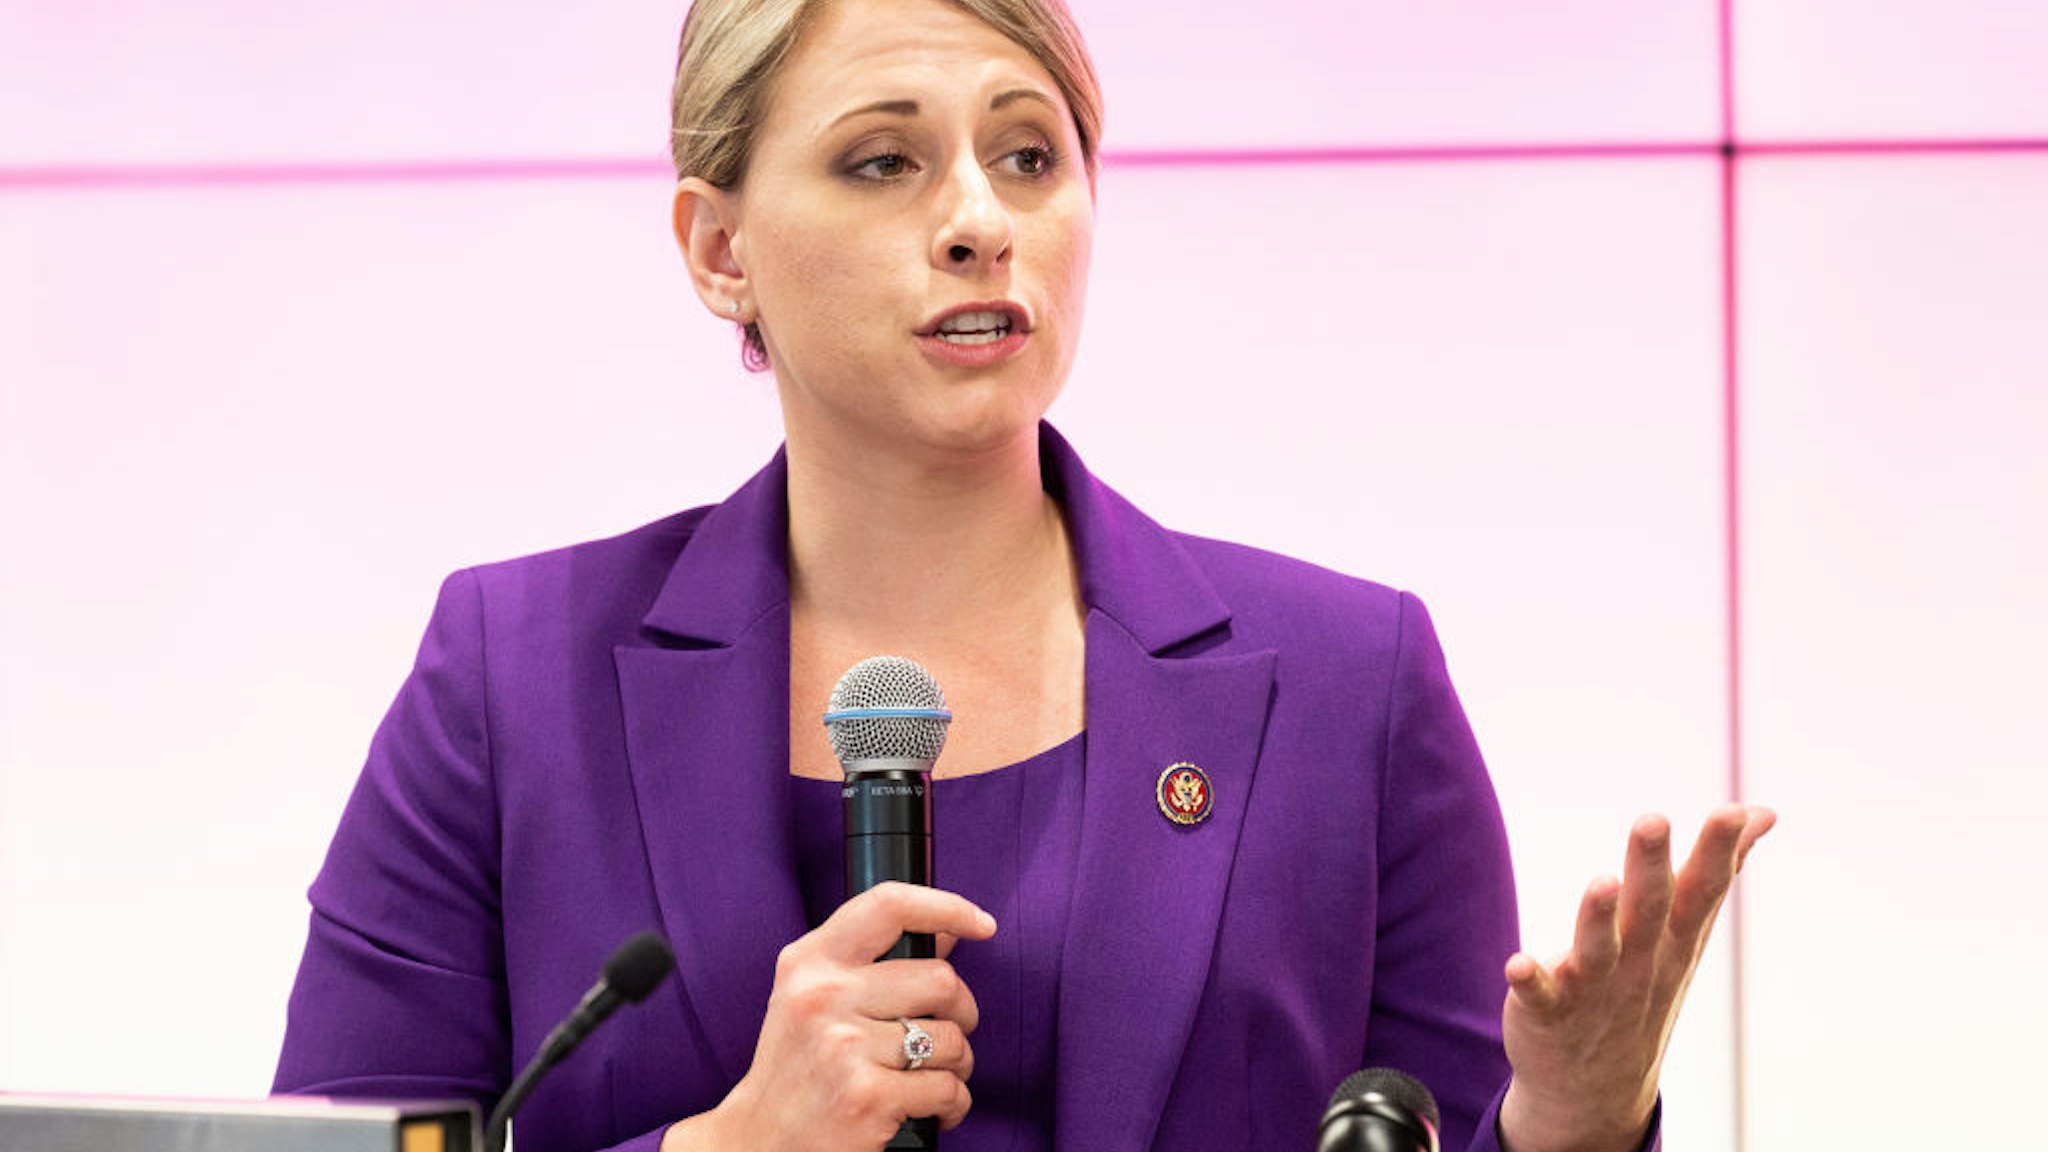 WASHINGTON, D C , UNITED STATES - 2019/06/24: U.S. Representative Katie Hill (D-CA) speaking at the Ignite Young Women Run D.C. Conference in Washington, DC.